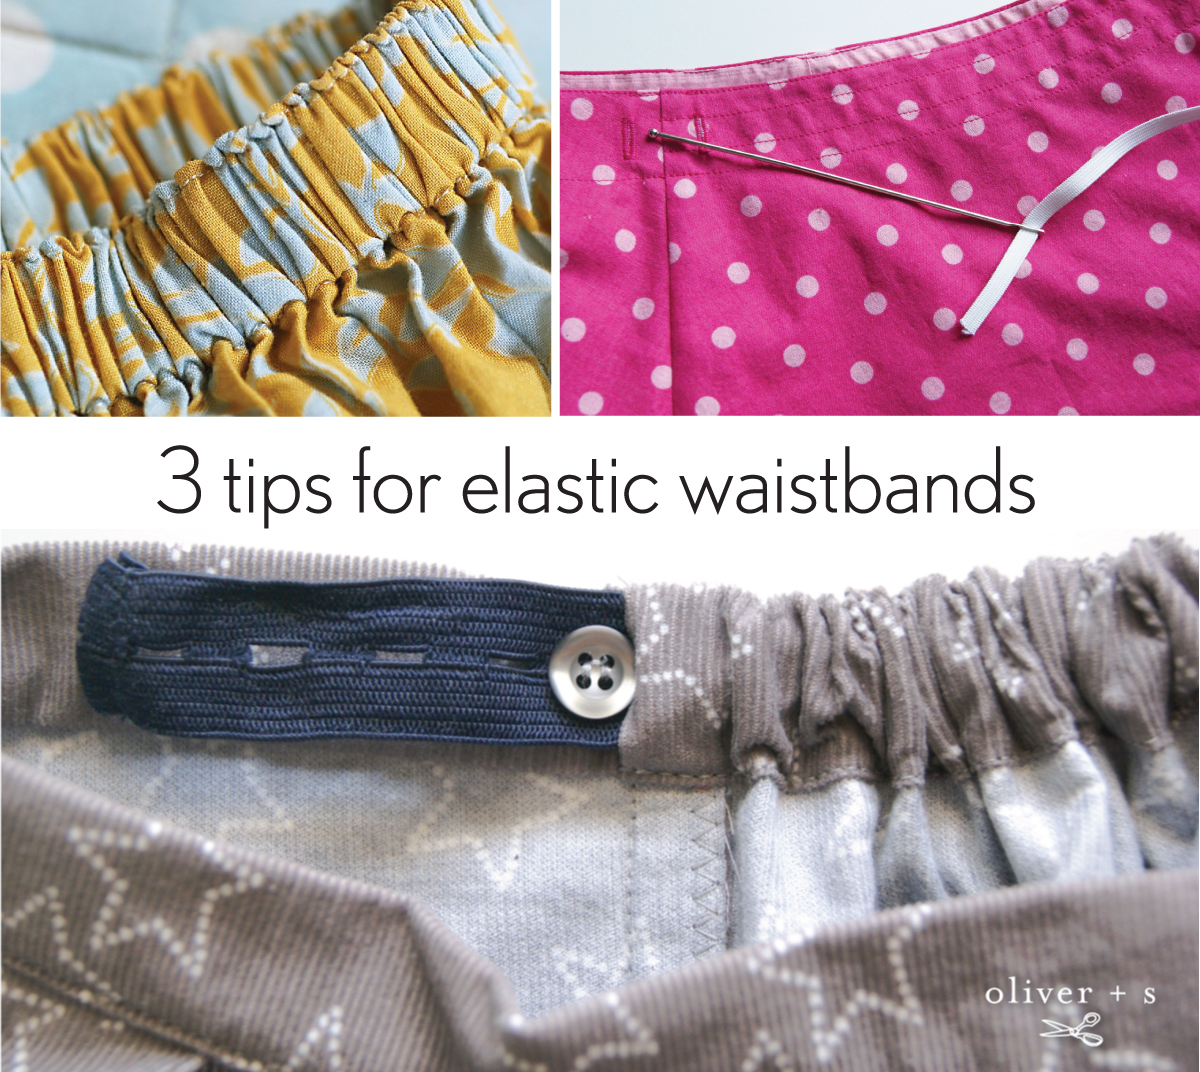 Three Tips for Elastic Waistbands | Blog | Oliver + S